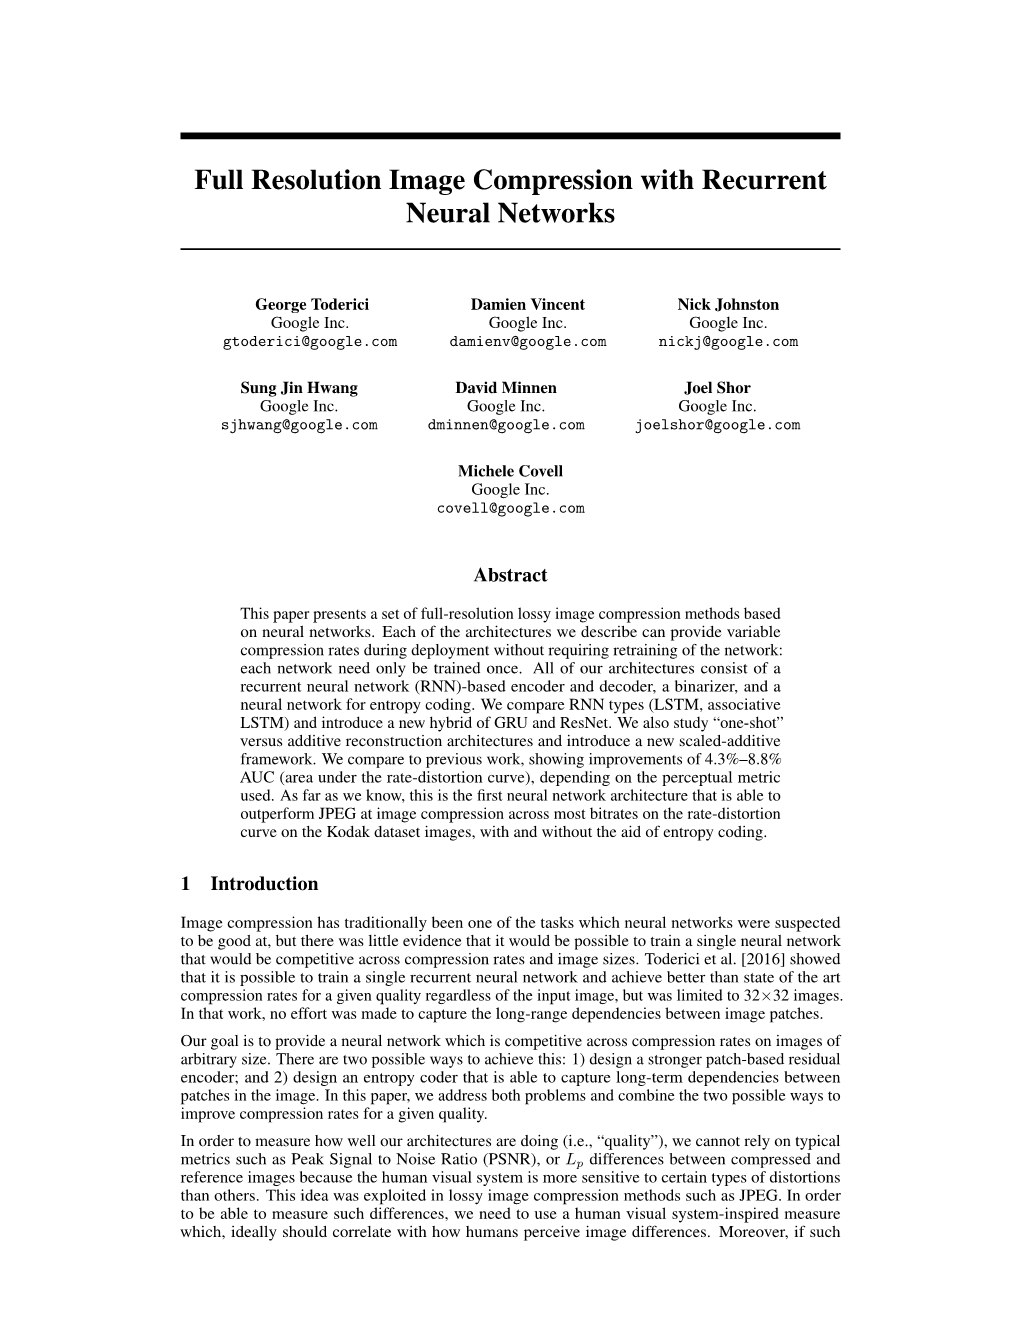 Full Resolution Image Compression with Recurrent Neural Networks